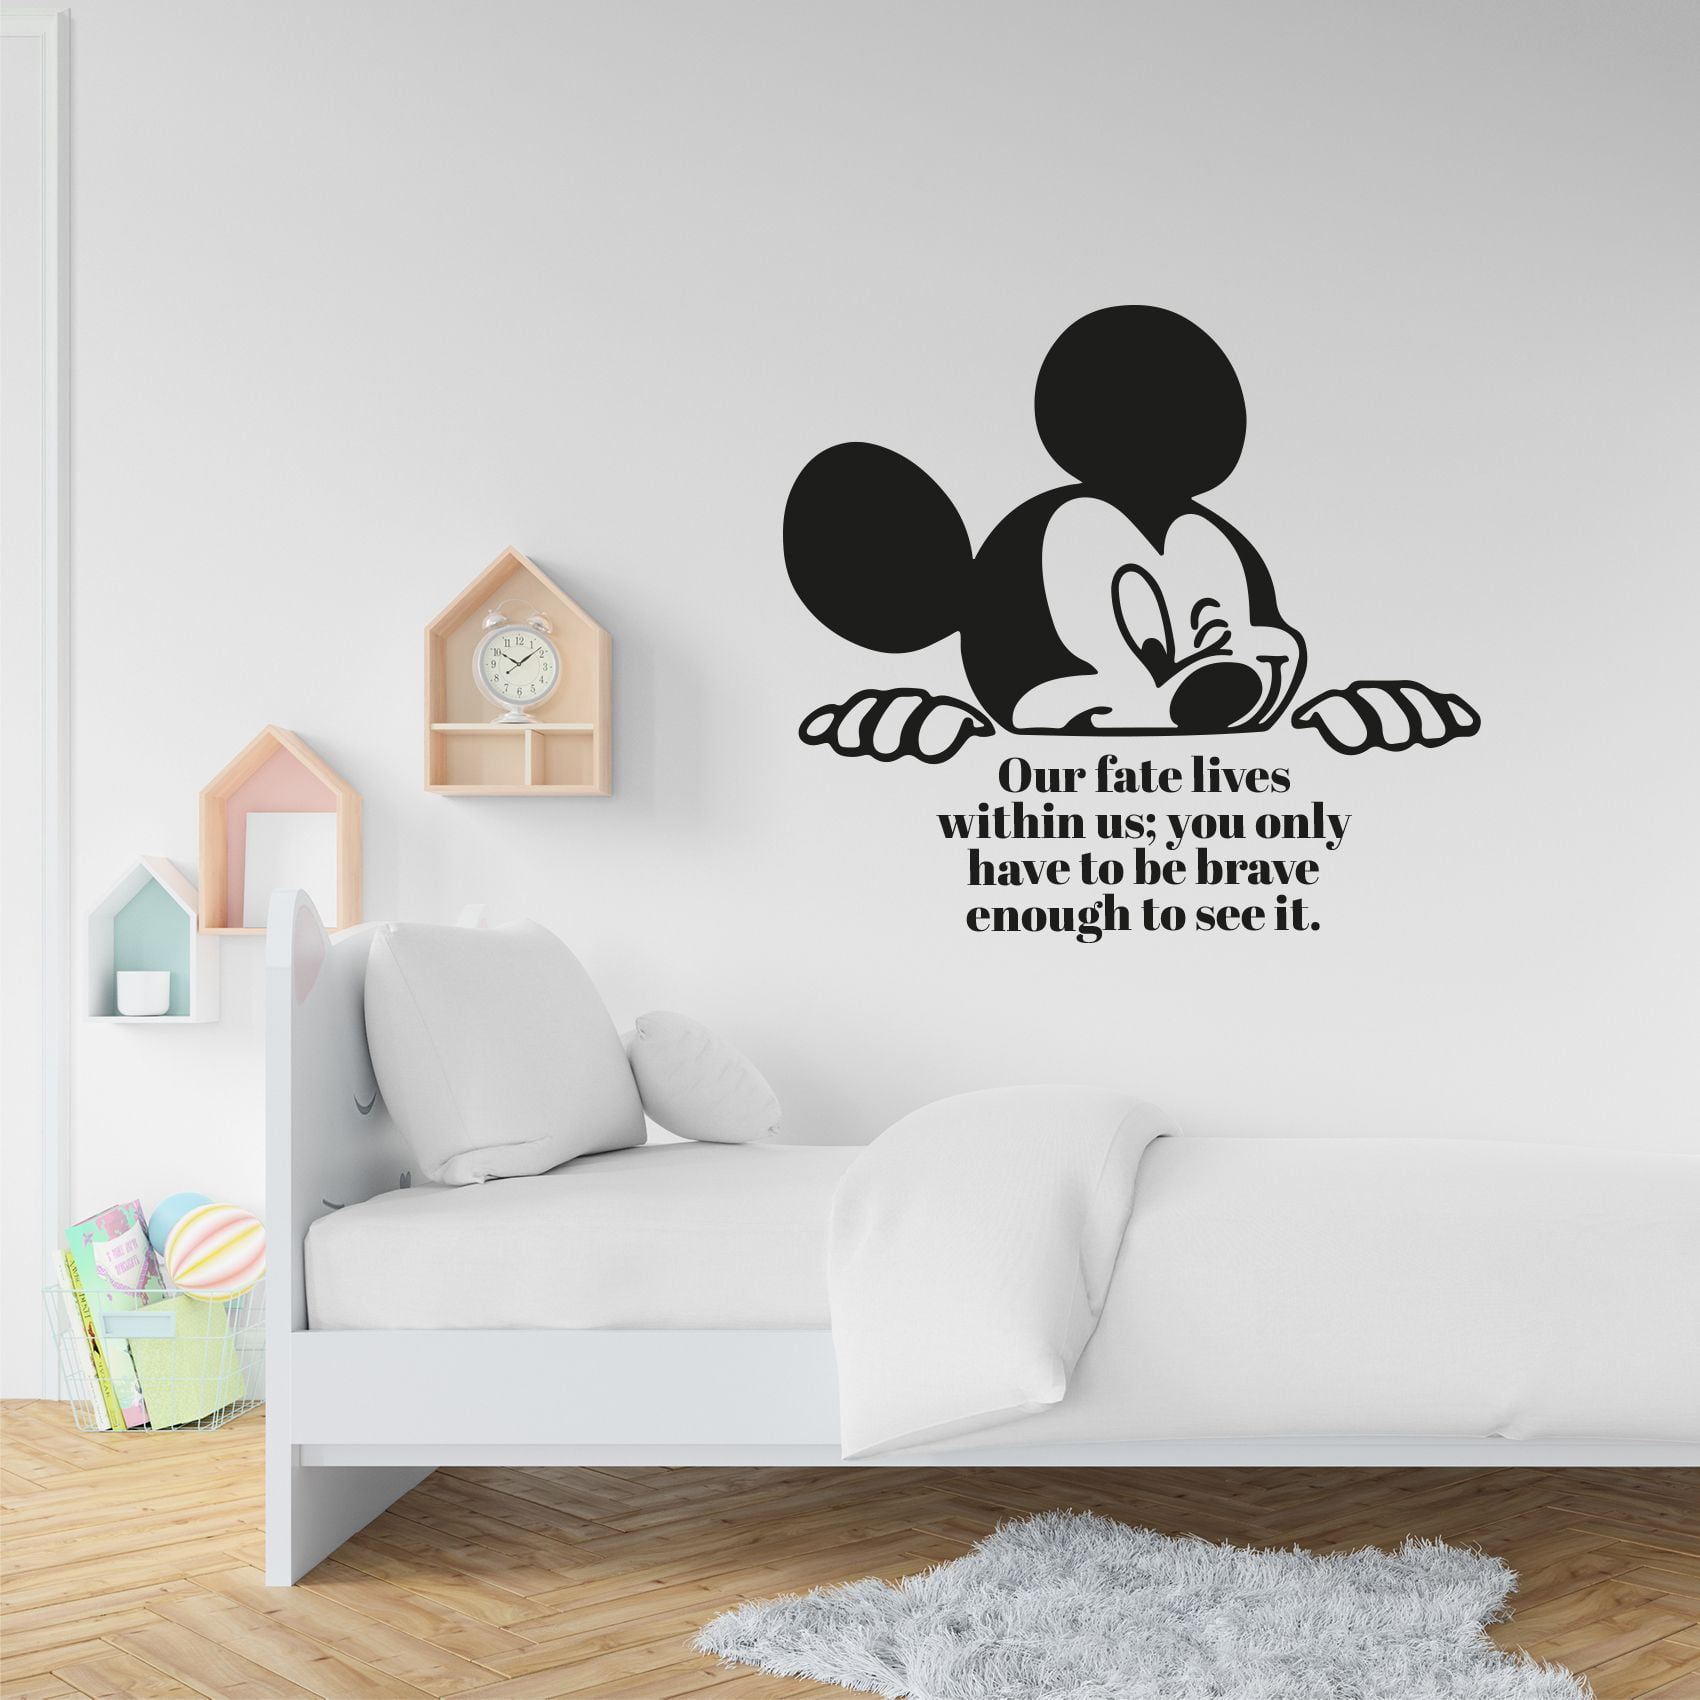 Wall Stickers Don't Worry Be Happy Quote Office Art Decals Home Room Decor 8C 